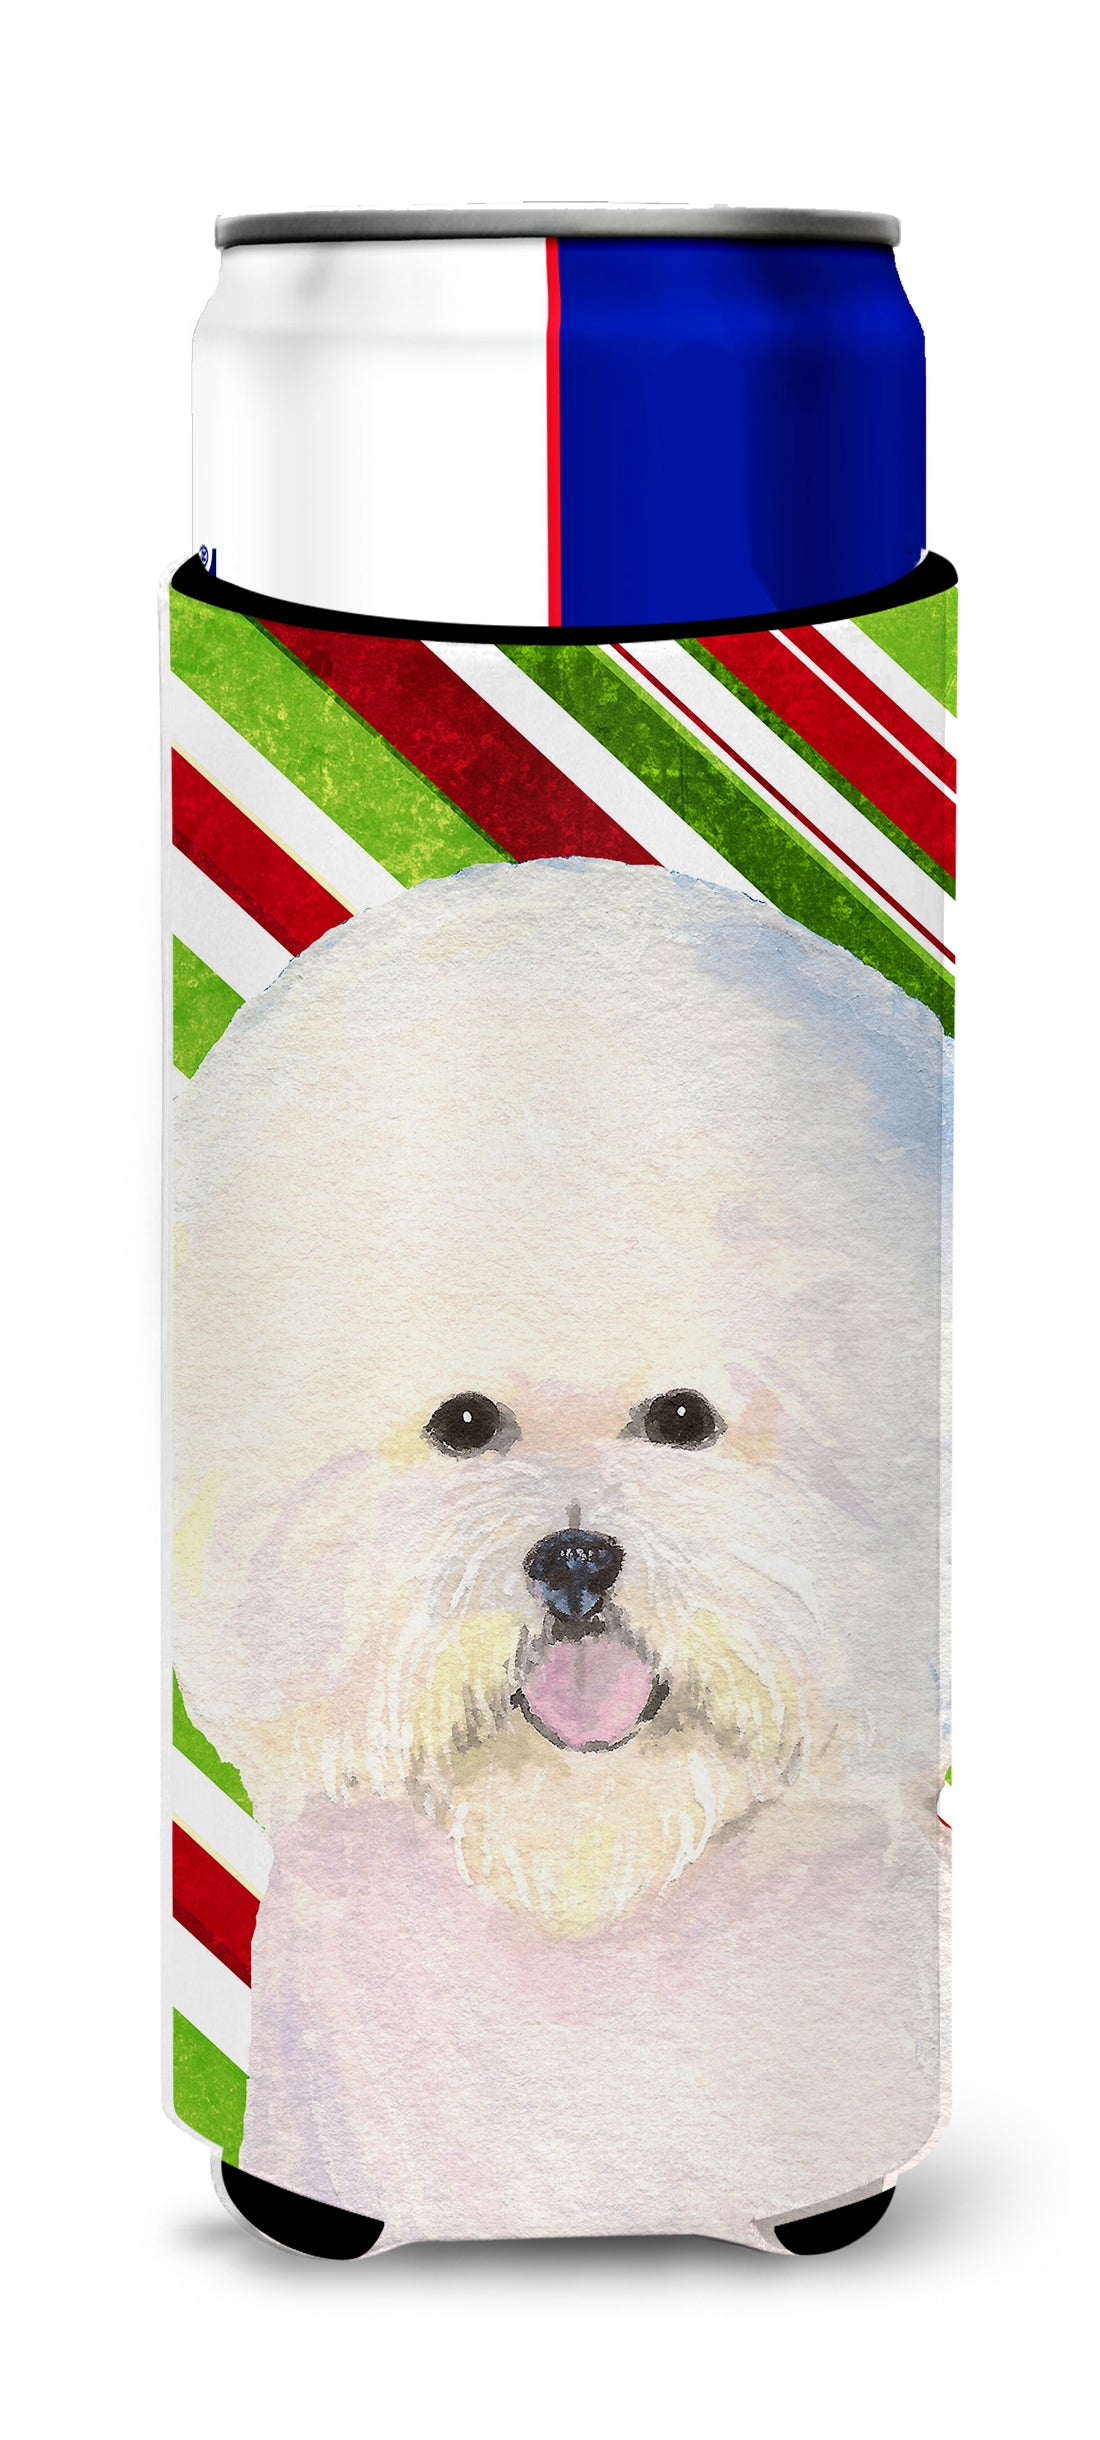 Bichon Frise Candy Cane Holiday Christmas Ultra Beverage Insulators for slim cans SS4595MUK